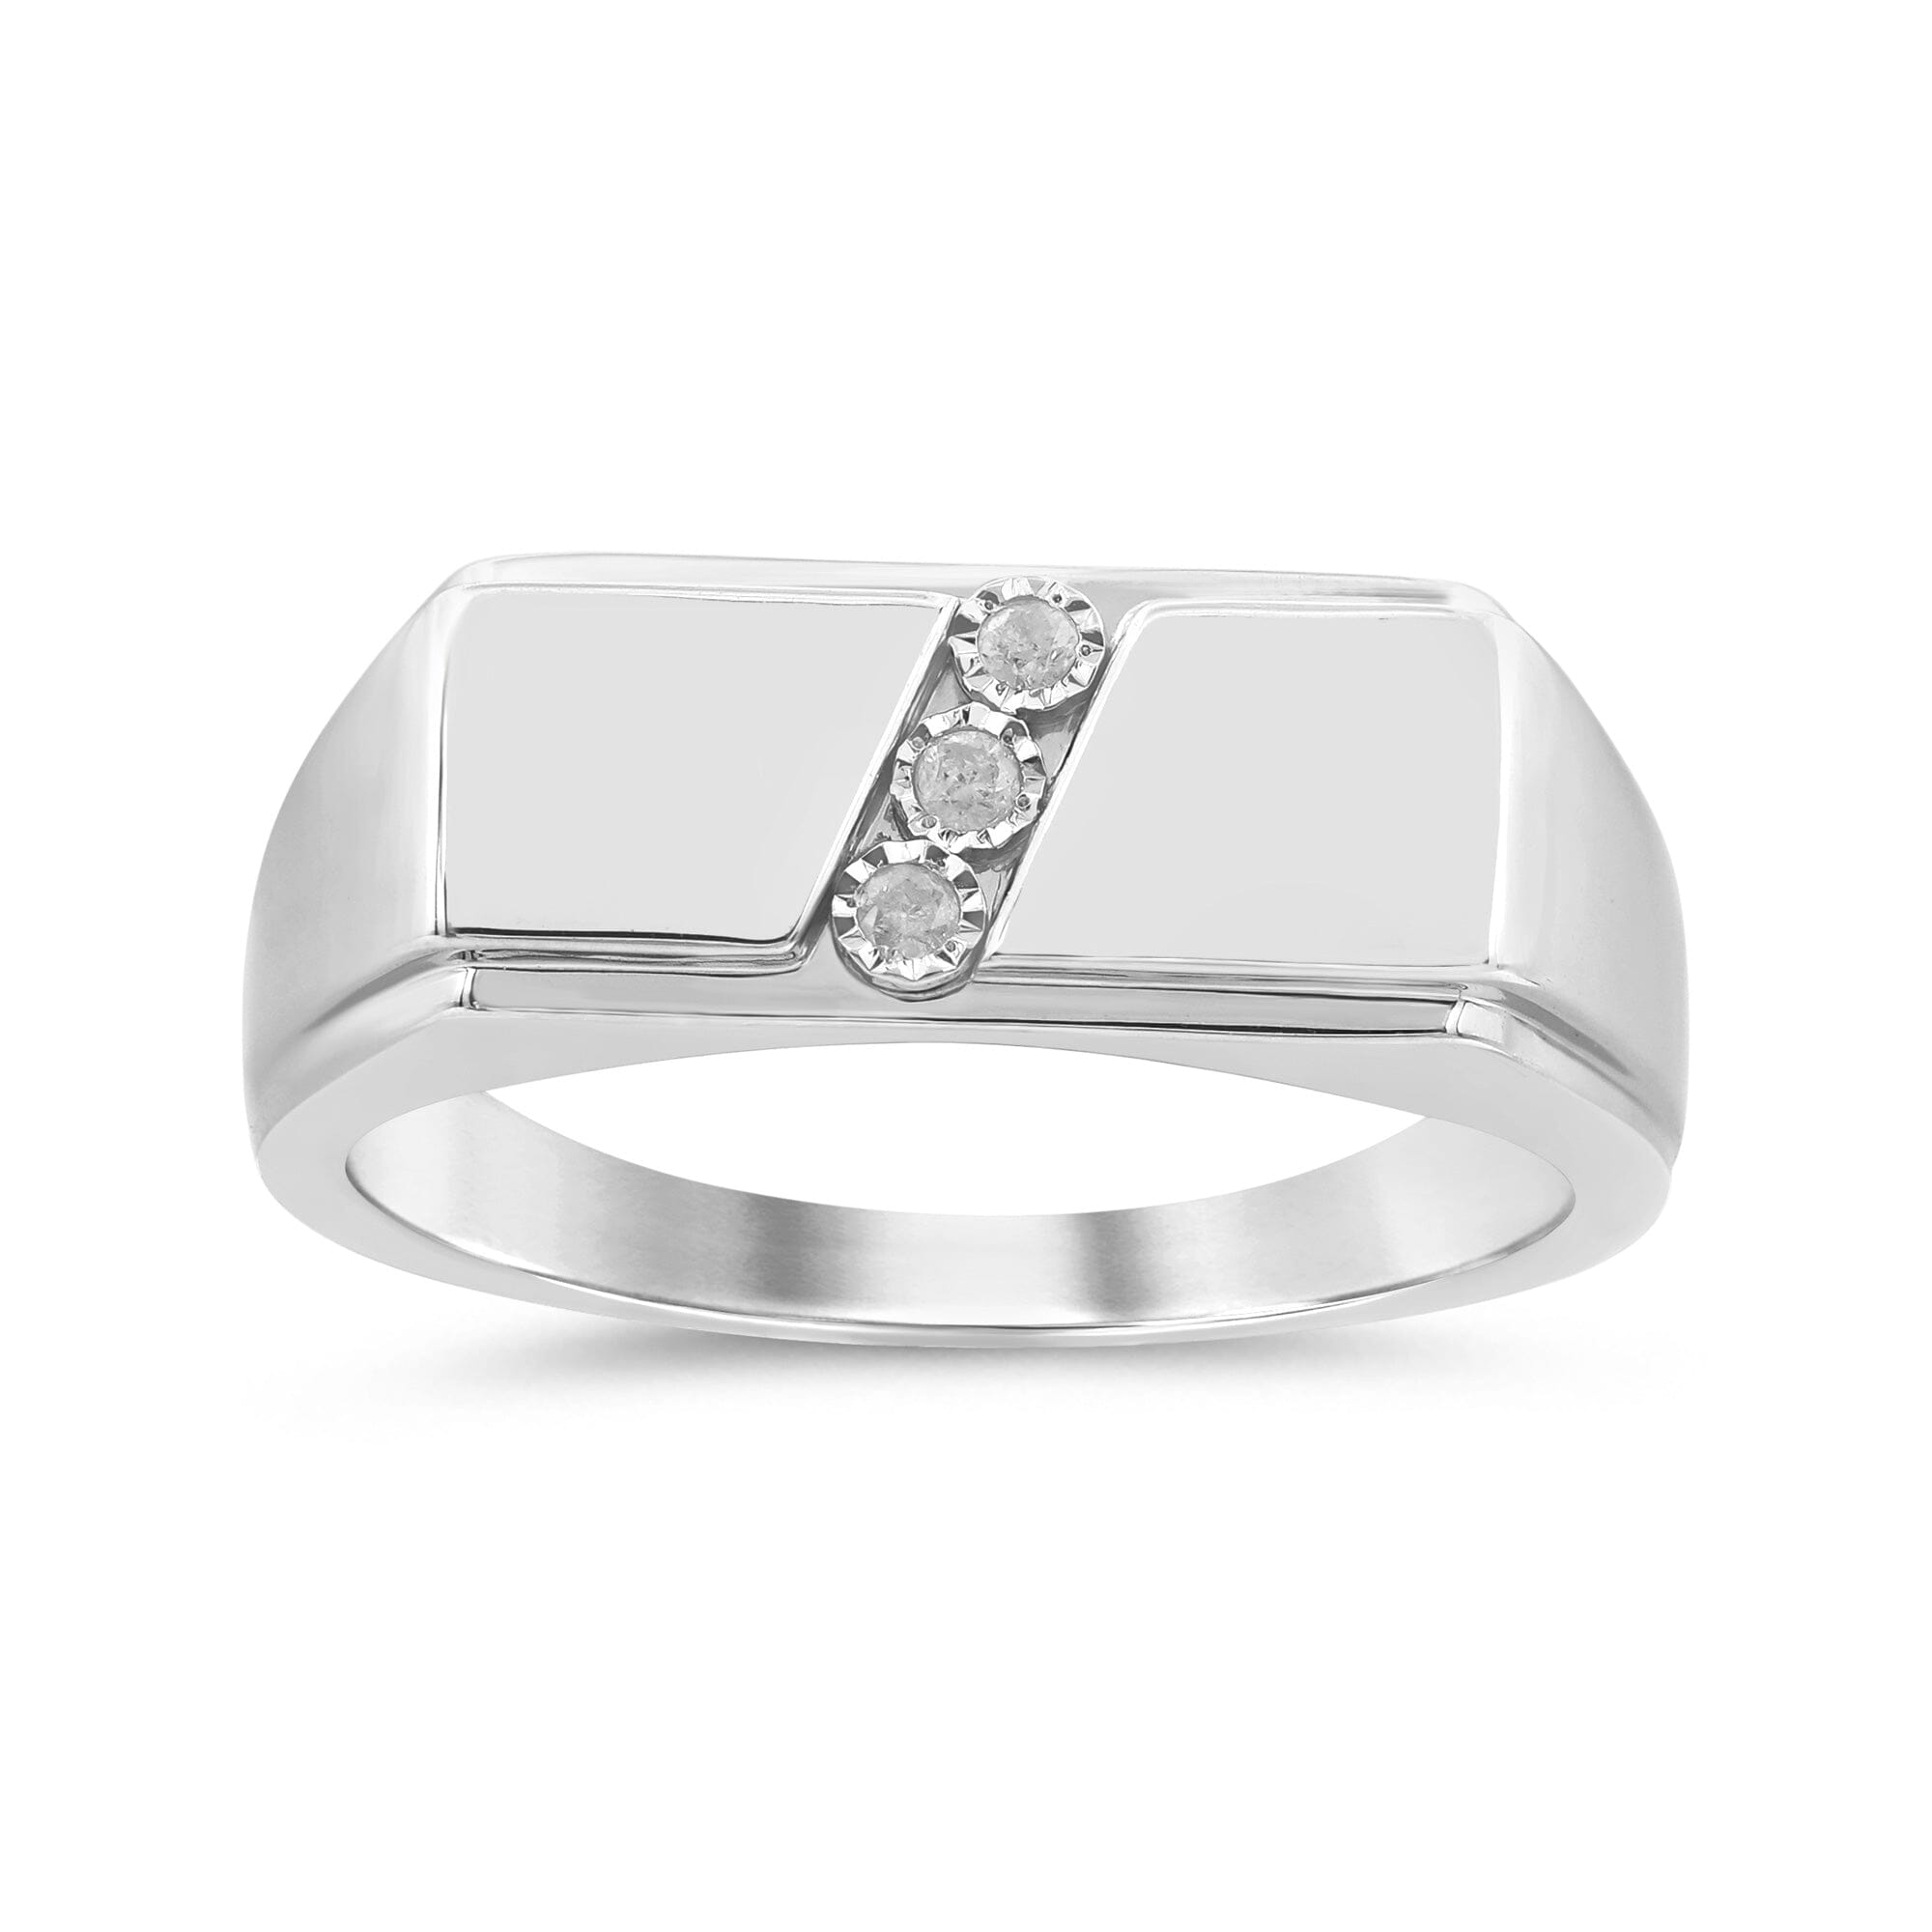 Brilliant Diagonal Set Ring with 0.05ct Diamonds in Sterling Silver Rings Bevilles 